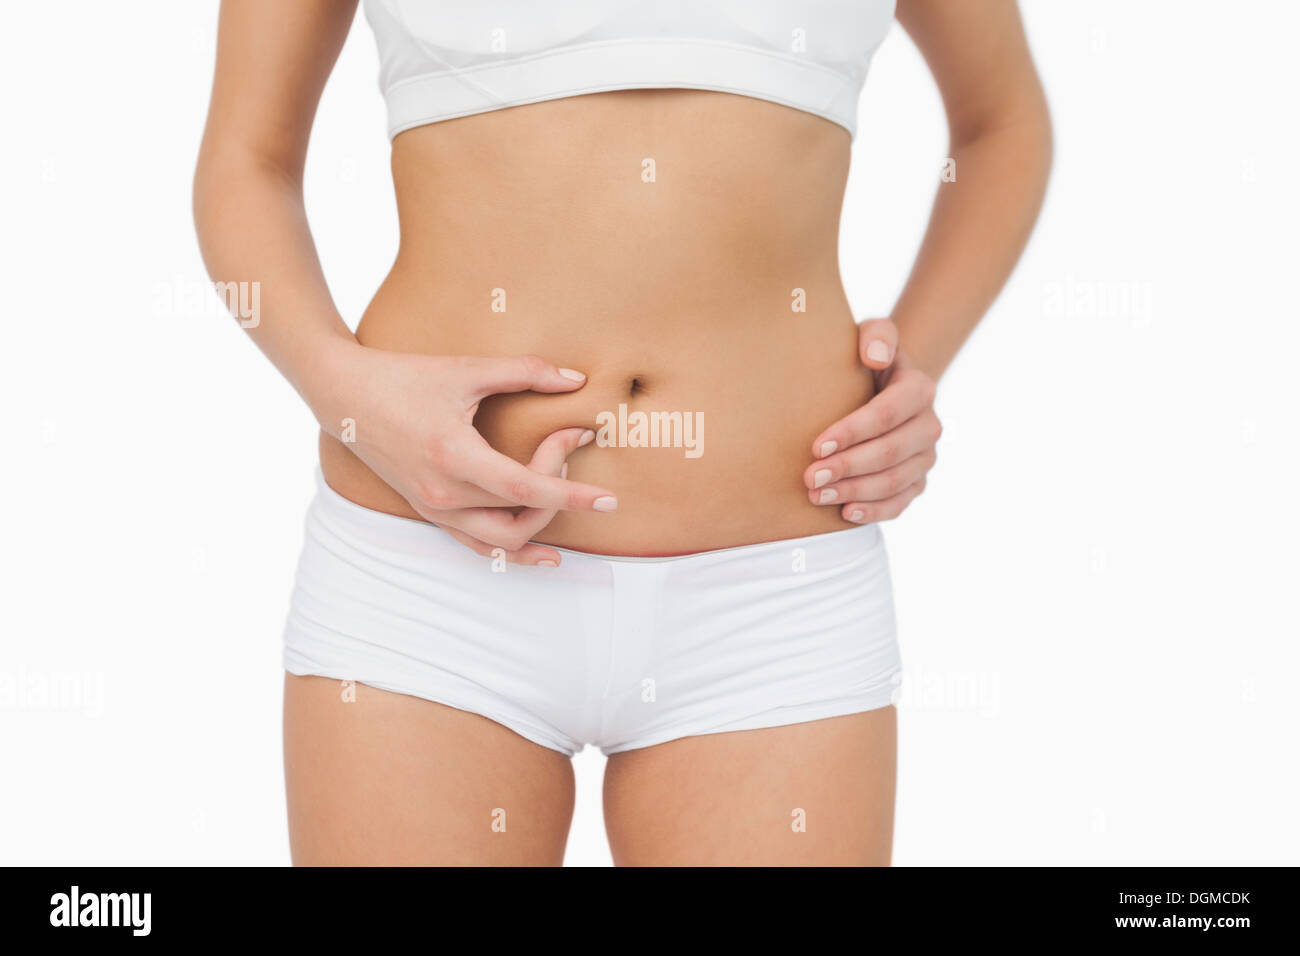 Slim young woman without any fat on her belly Stock Photo